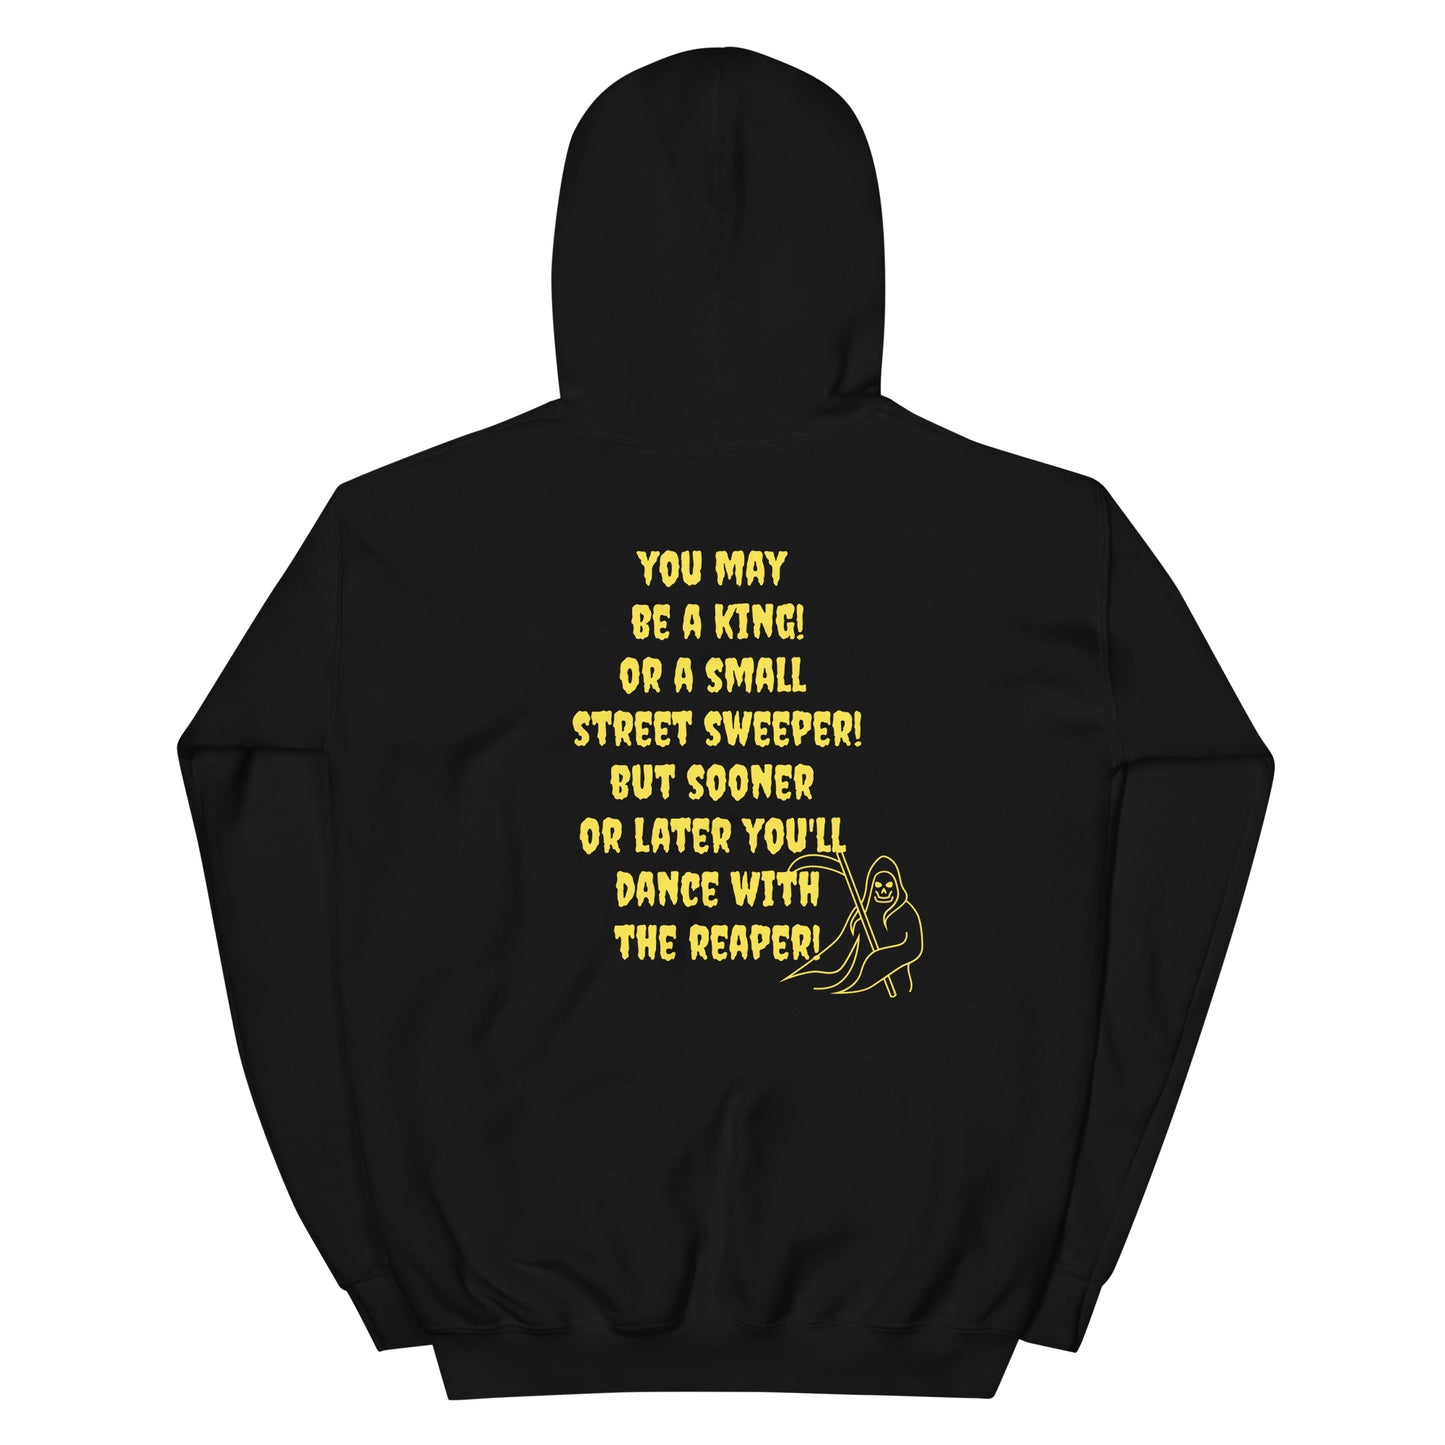 Dance with the reaper - Unisex Hoodie